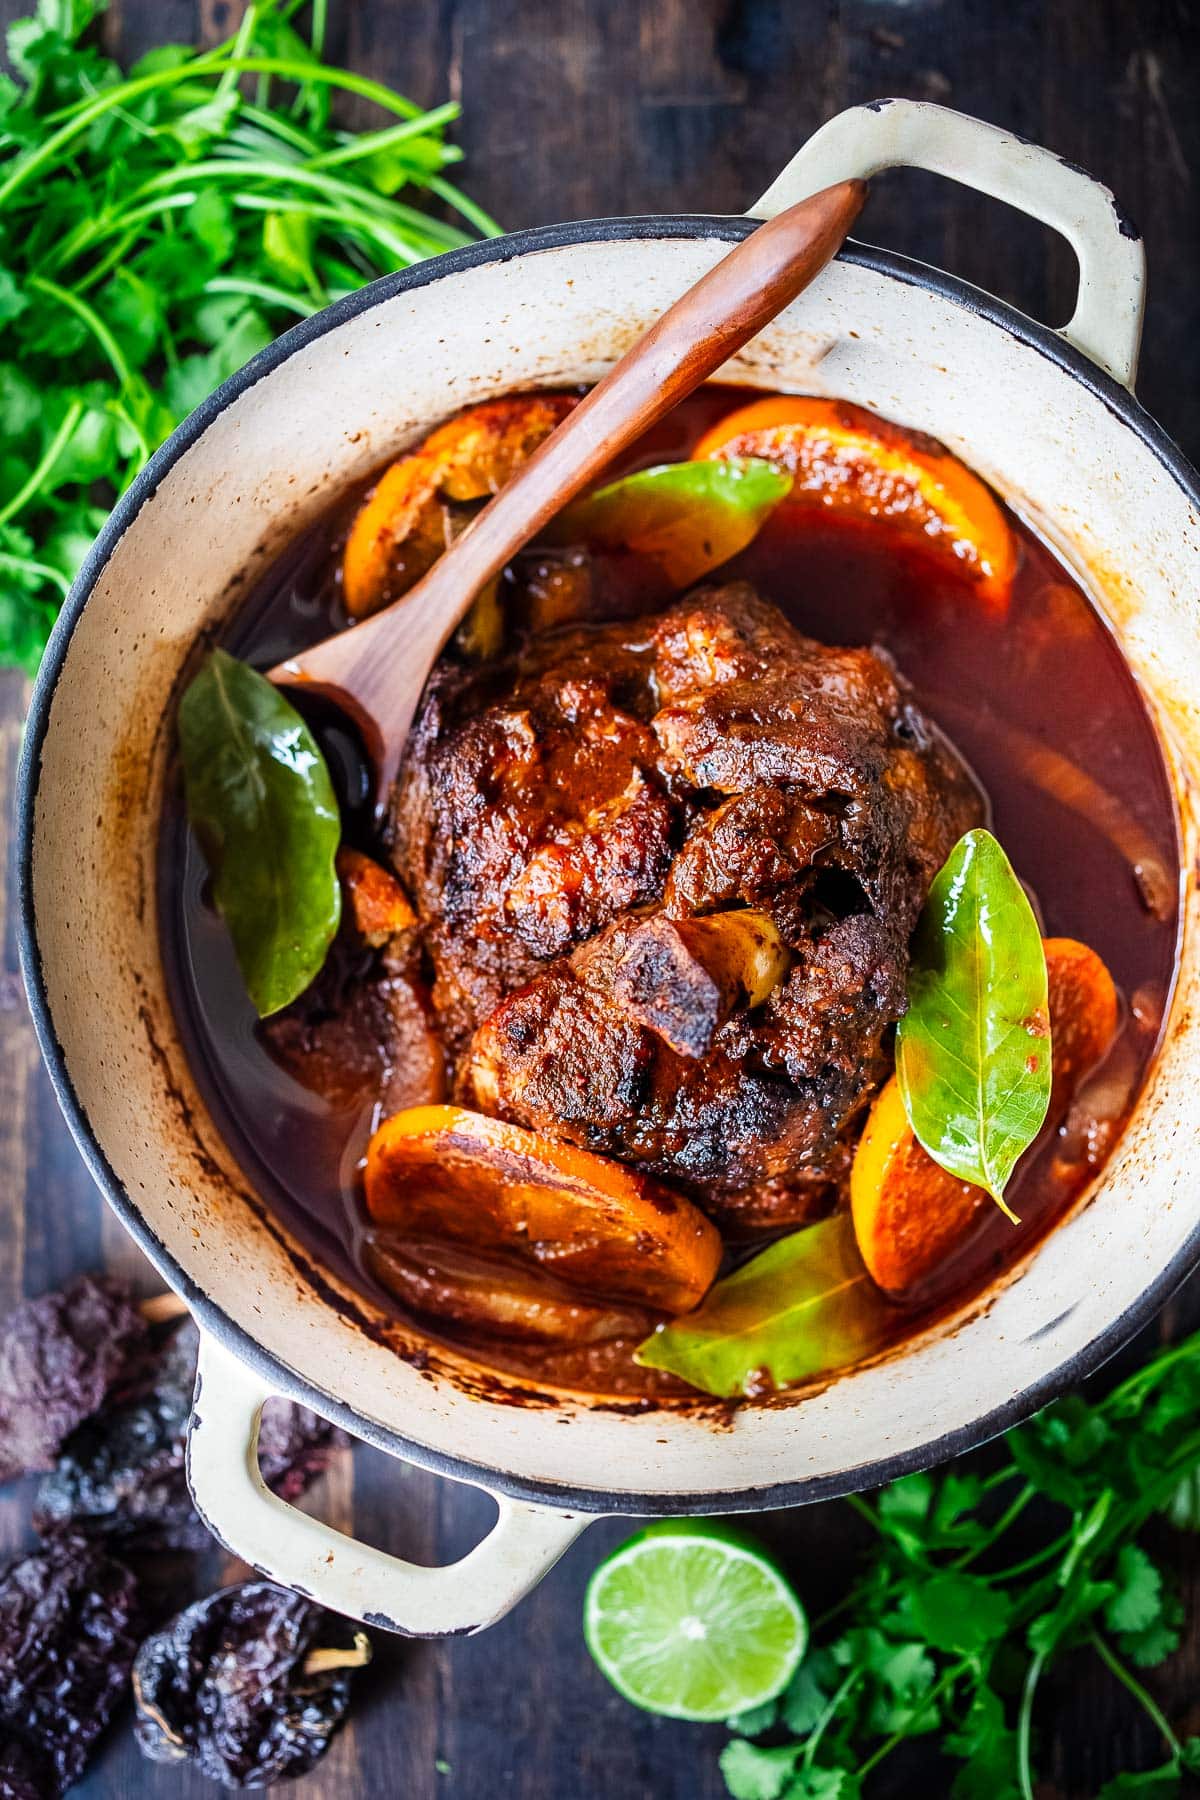 This simple, delicious Barbacoa recipe hails from the Oaxacan region of Mexico, resulting in the most flavorful,  tender, fall-off-the-bone meat. Slow roast it in your oven or use a slow cooker. Perfect in tacos or burritos. 